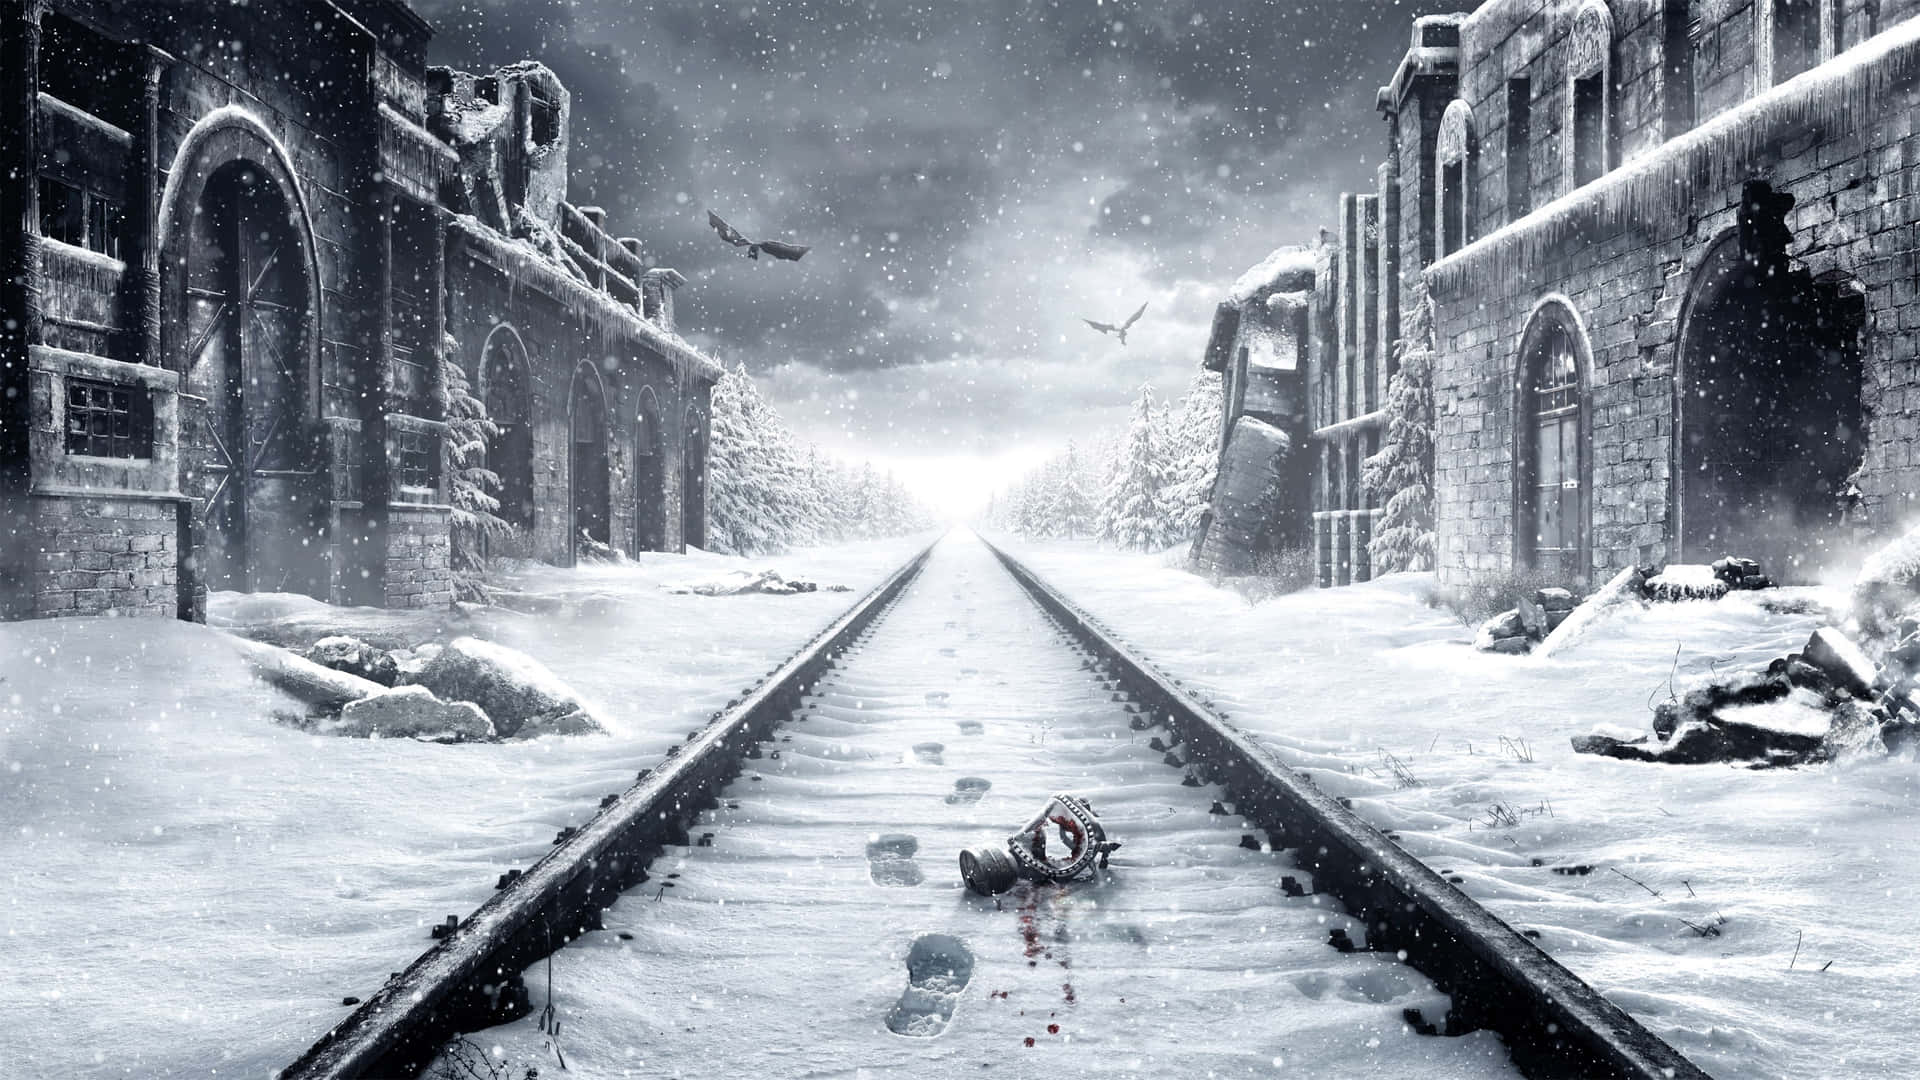 A Train Tracks With Snow And A Bloody Scene